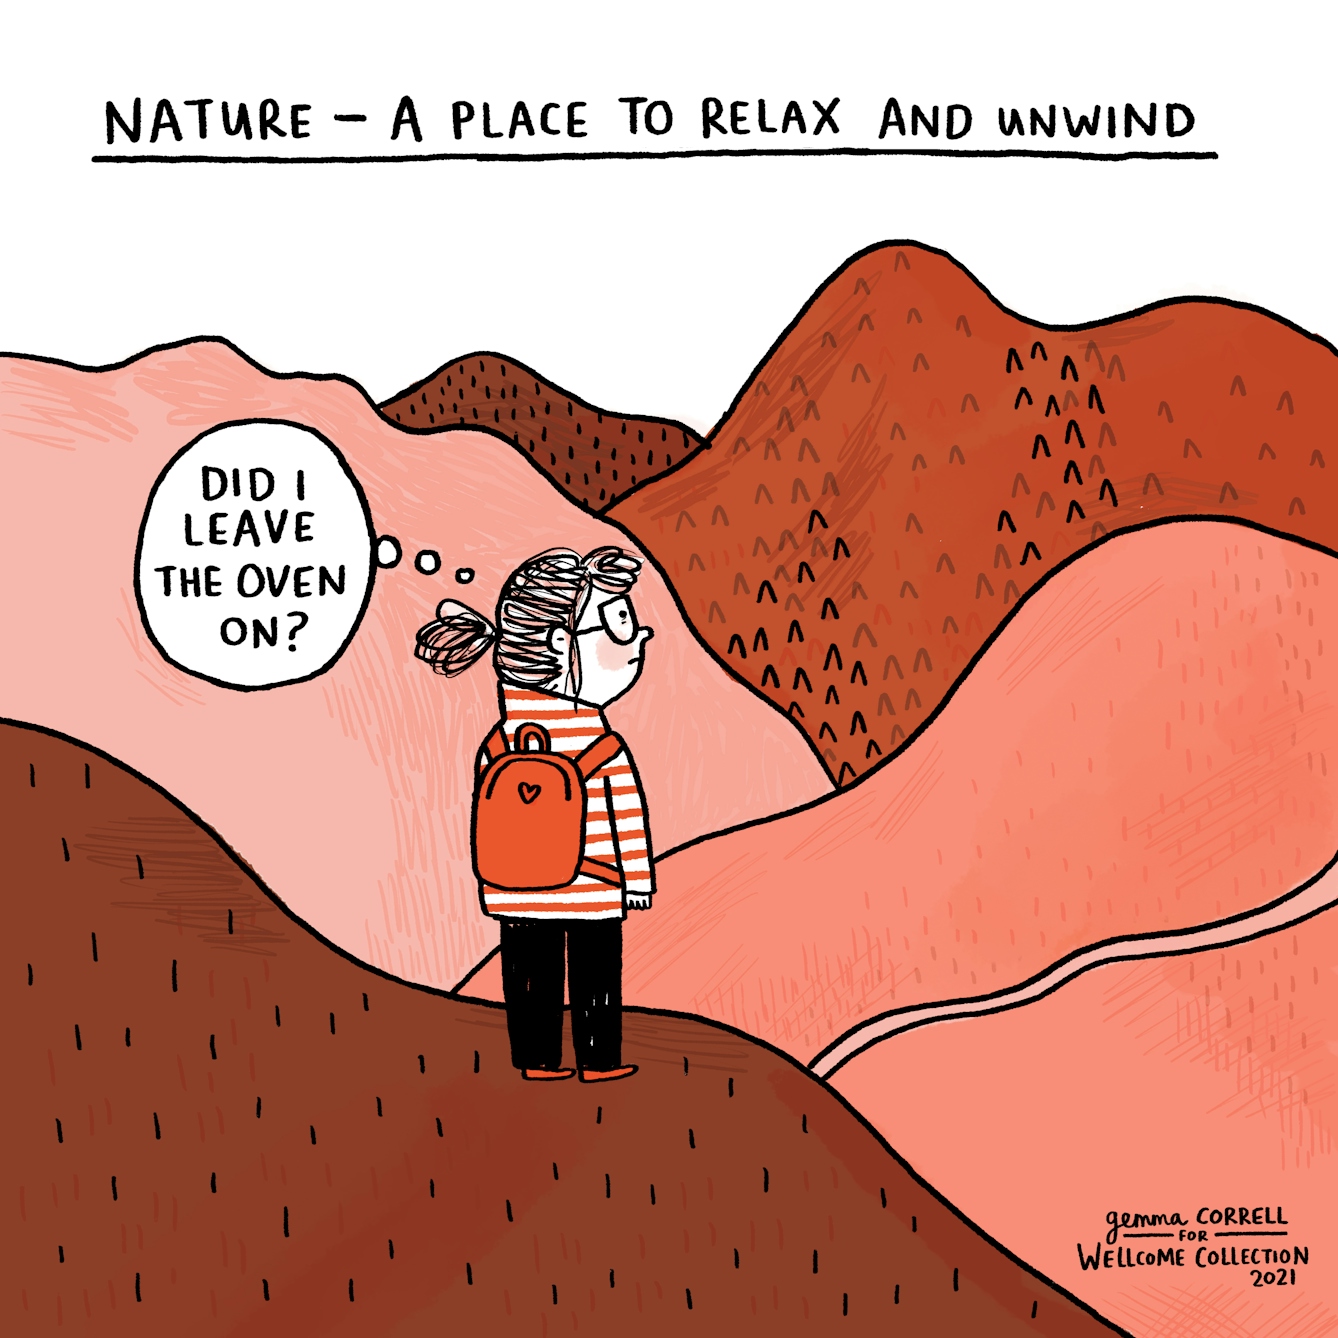 Main heading reads 'Nature - a place to relax and unwind'.

The comic shows a woman in a striped jumper wearing glasses and a backpack standing on a mountain. There are several other mountains in front of her. A thought bubble above her head reads 'Did I leave the oven on?'.